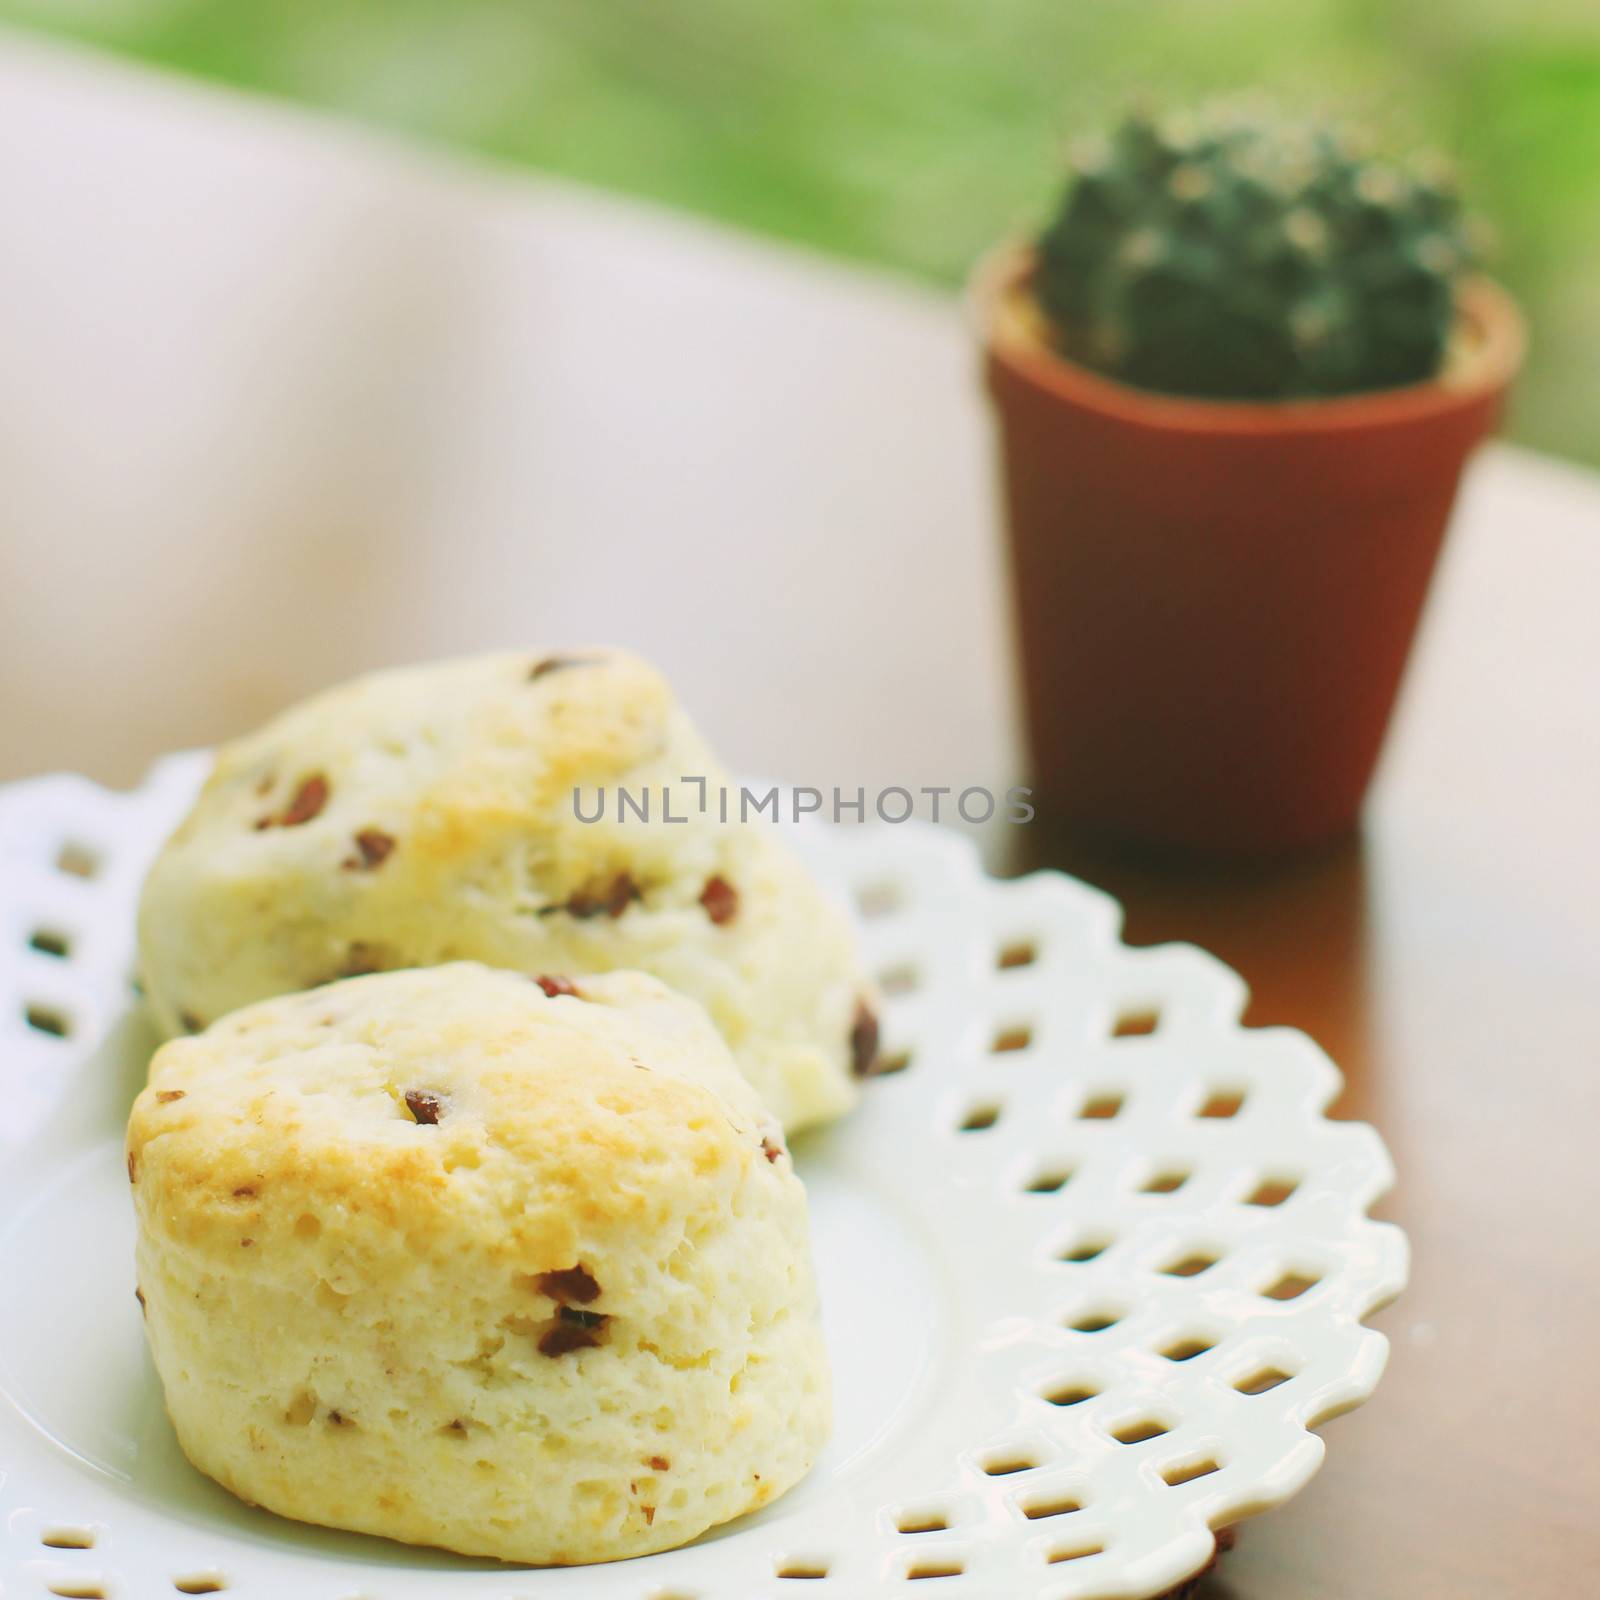 Homemade freshly baked scones with cactus, retro filter effect by nuchylee